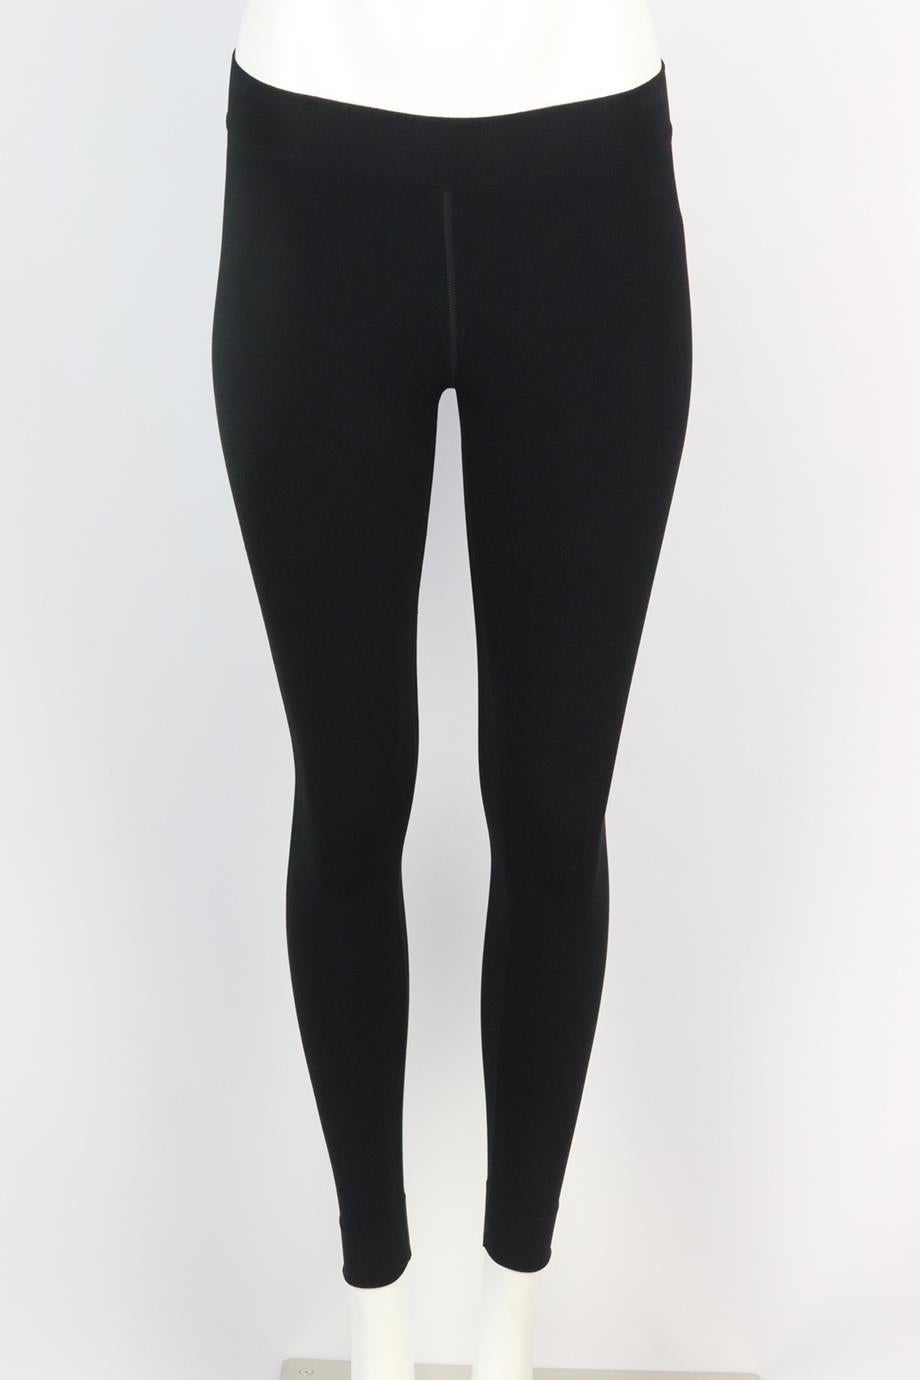 Azzedine Alaïa cropped stretch knit leggings. Black. Pull on. 66% Viscose, 16% polyamide, 14% polyester, 4% elastane. Size: FR 36 (UK 8, US 4, IT 40). Waist: 23 in. Hips: 31 in. Length: 33 in. Inseam: 24.75 in. Rise: 9 in. Very good condition - No